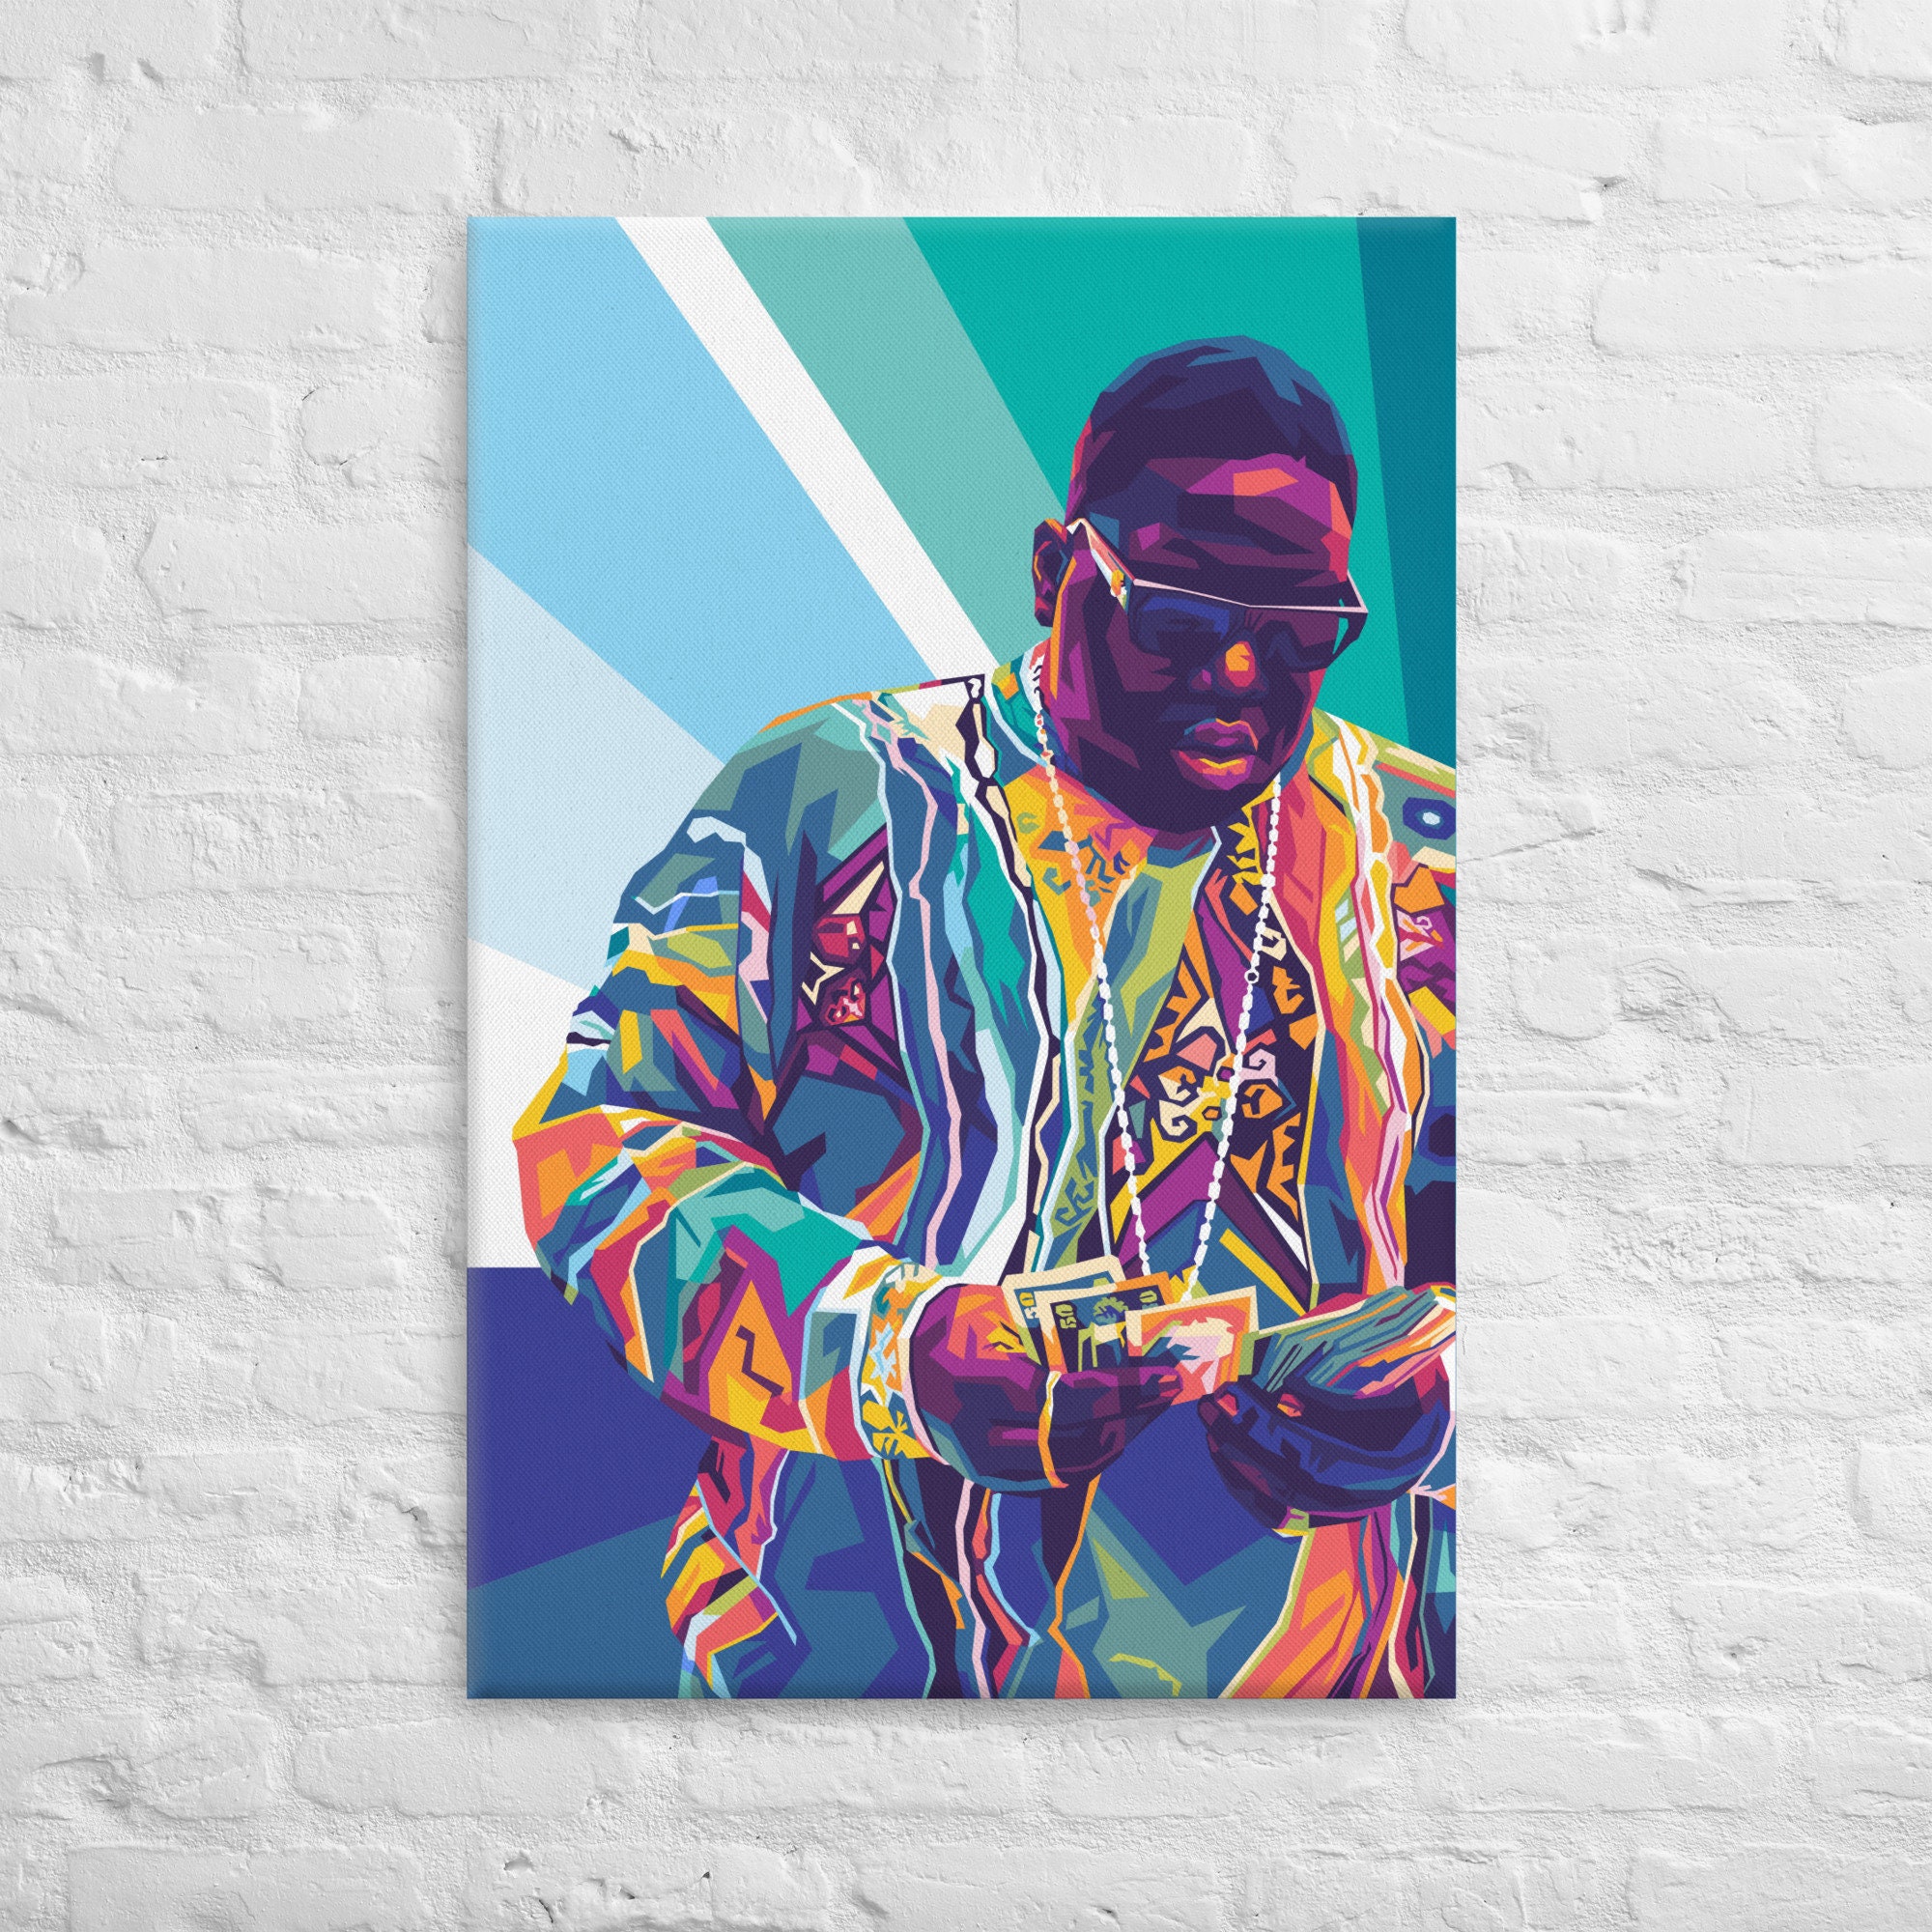 The Notorious B.I.G Lakers Kobe Jersey Canvas Print 